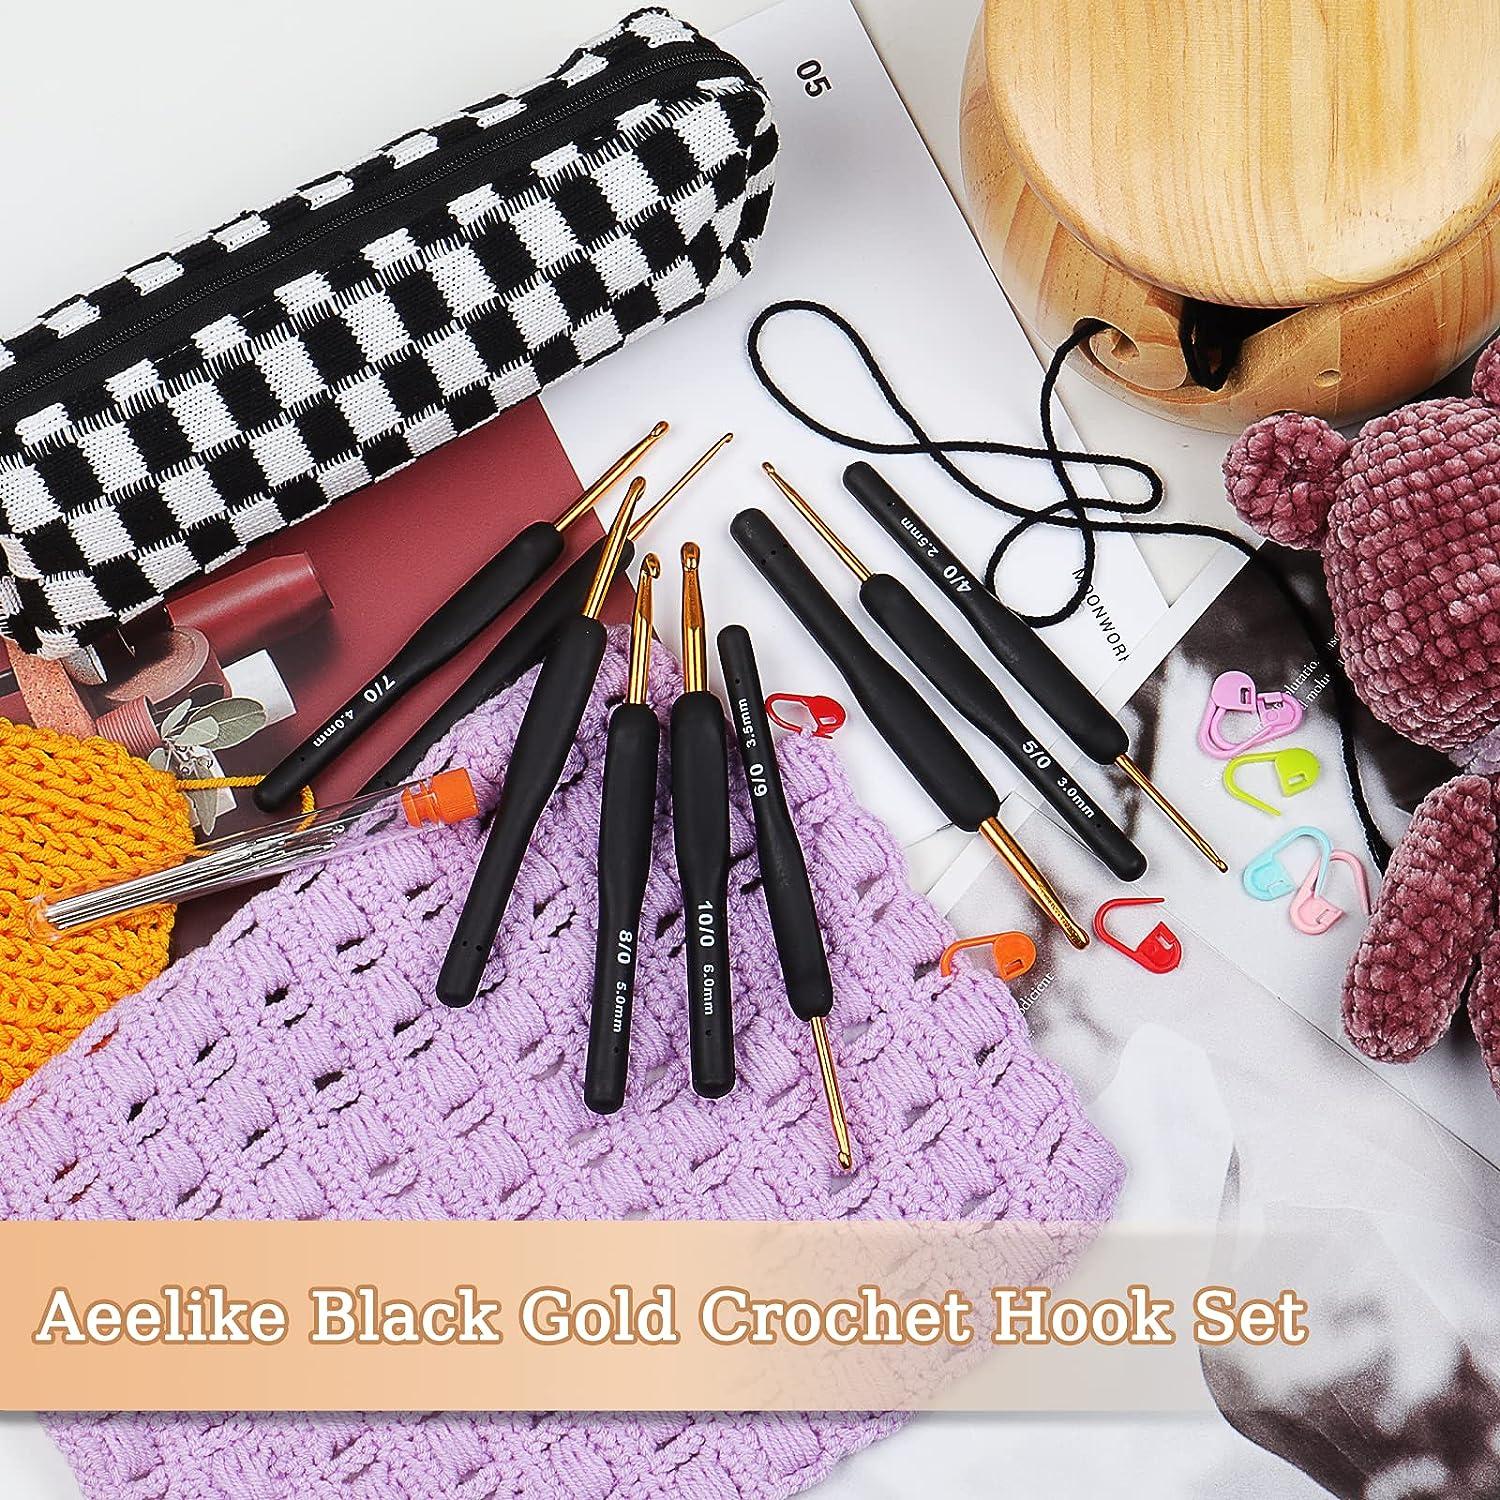 5.5 mm Crochet Hook, Wooden Handle Crochet Hooks 5.5 mm of Metal Hook, with  3 Big-Eyed Blunt Sewing Needles, 5 Markers and 1 Needle Storage Bottle